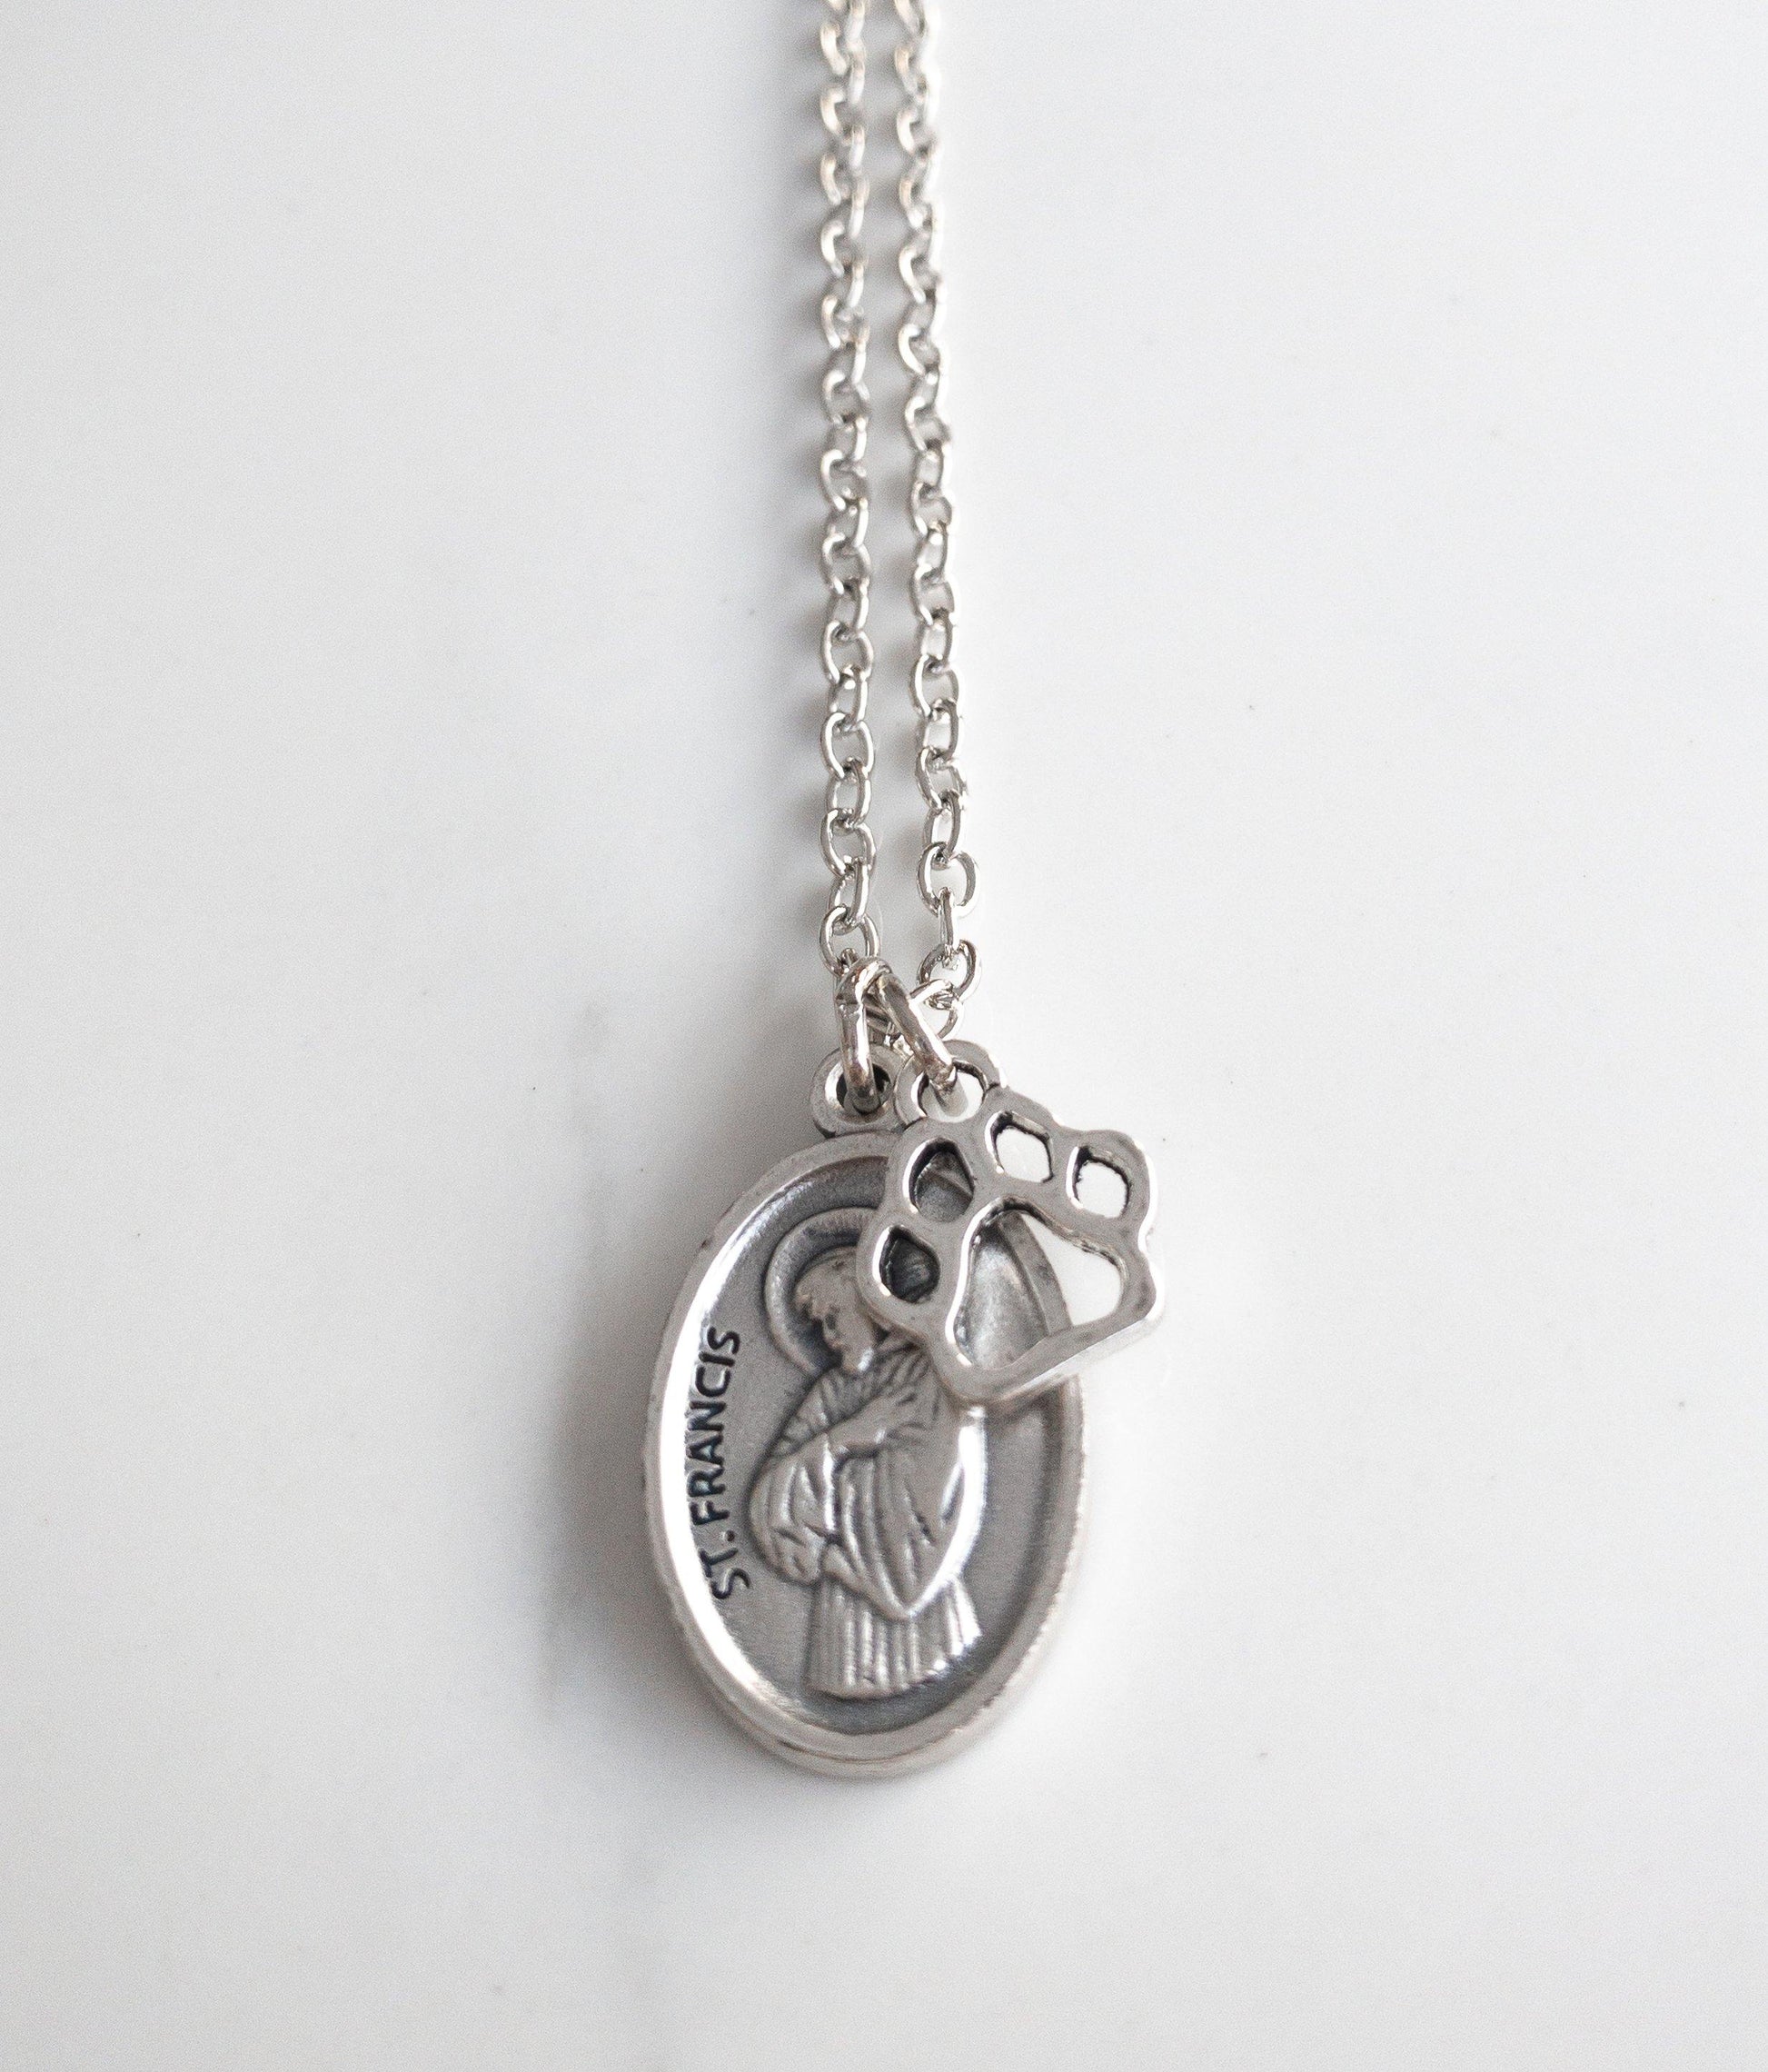 St Francis of Assisi Necklace - Sagely Sparrow